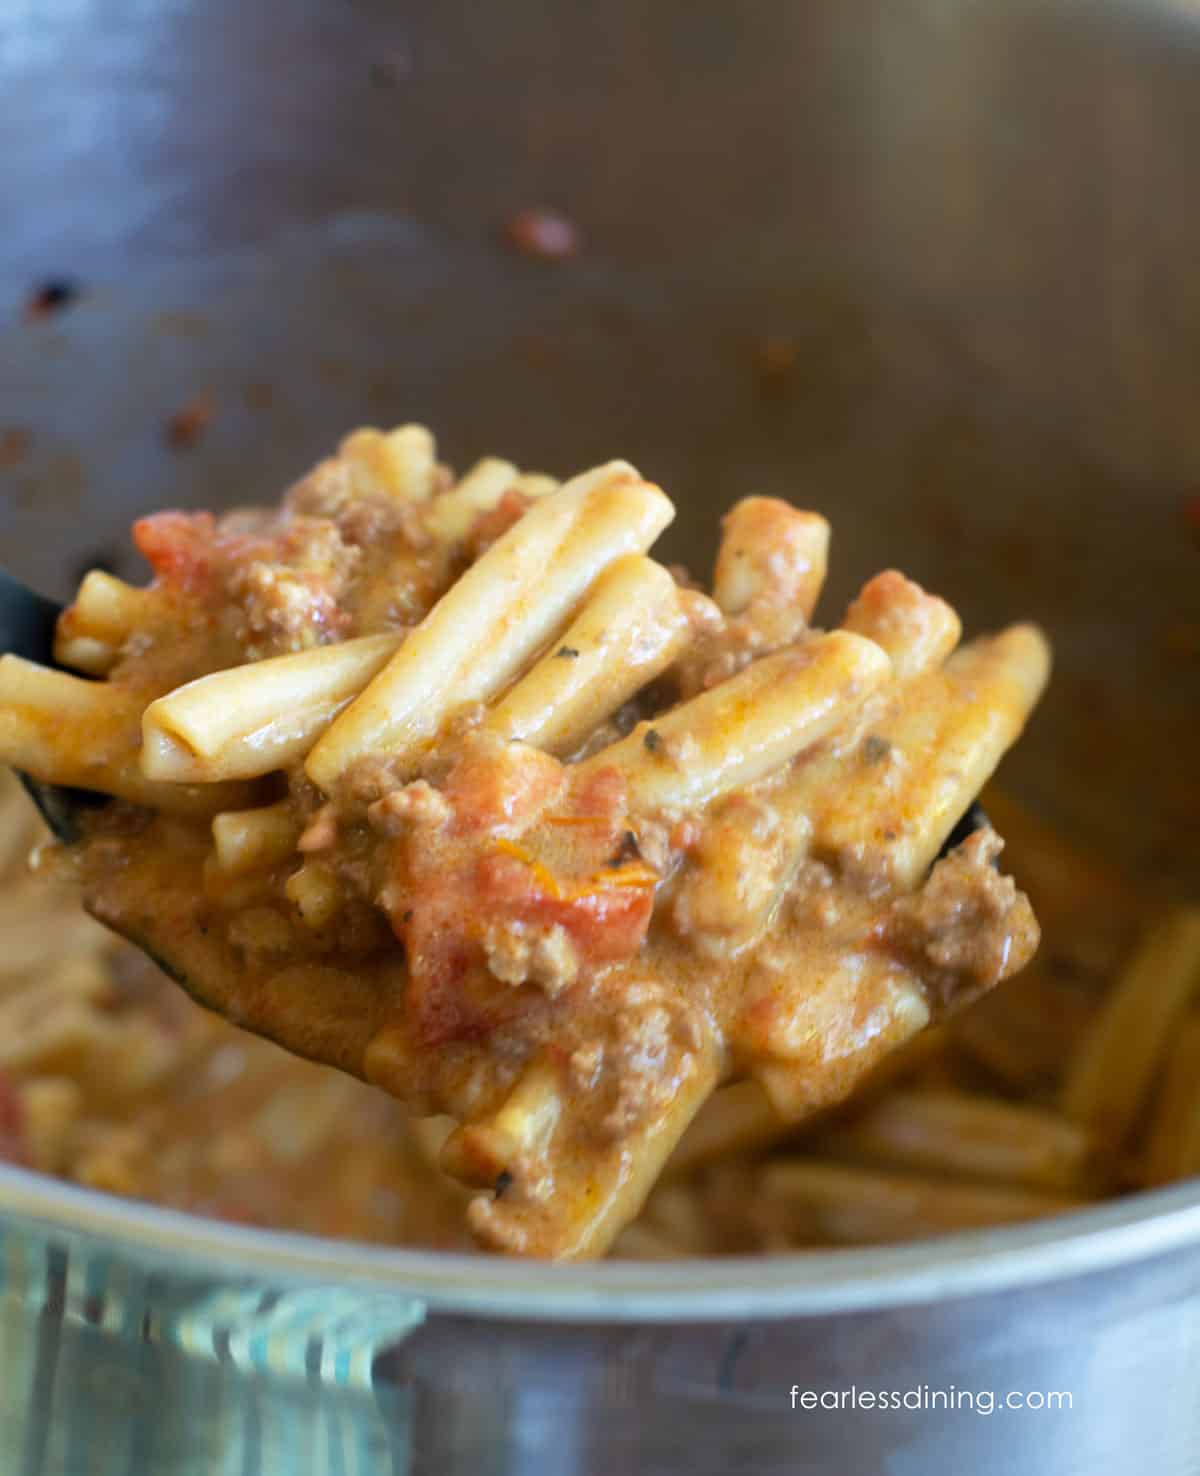 A serving spoon full of cheeseburger pasta.